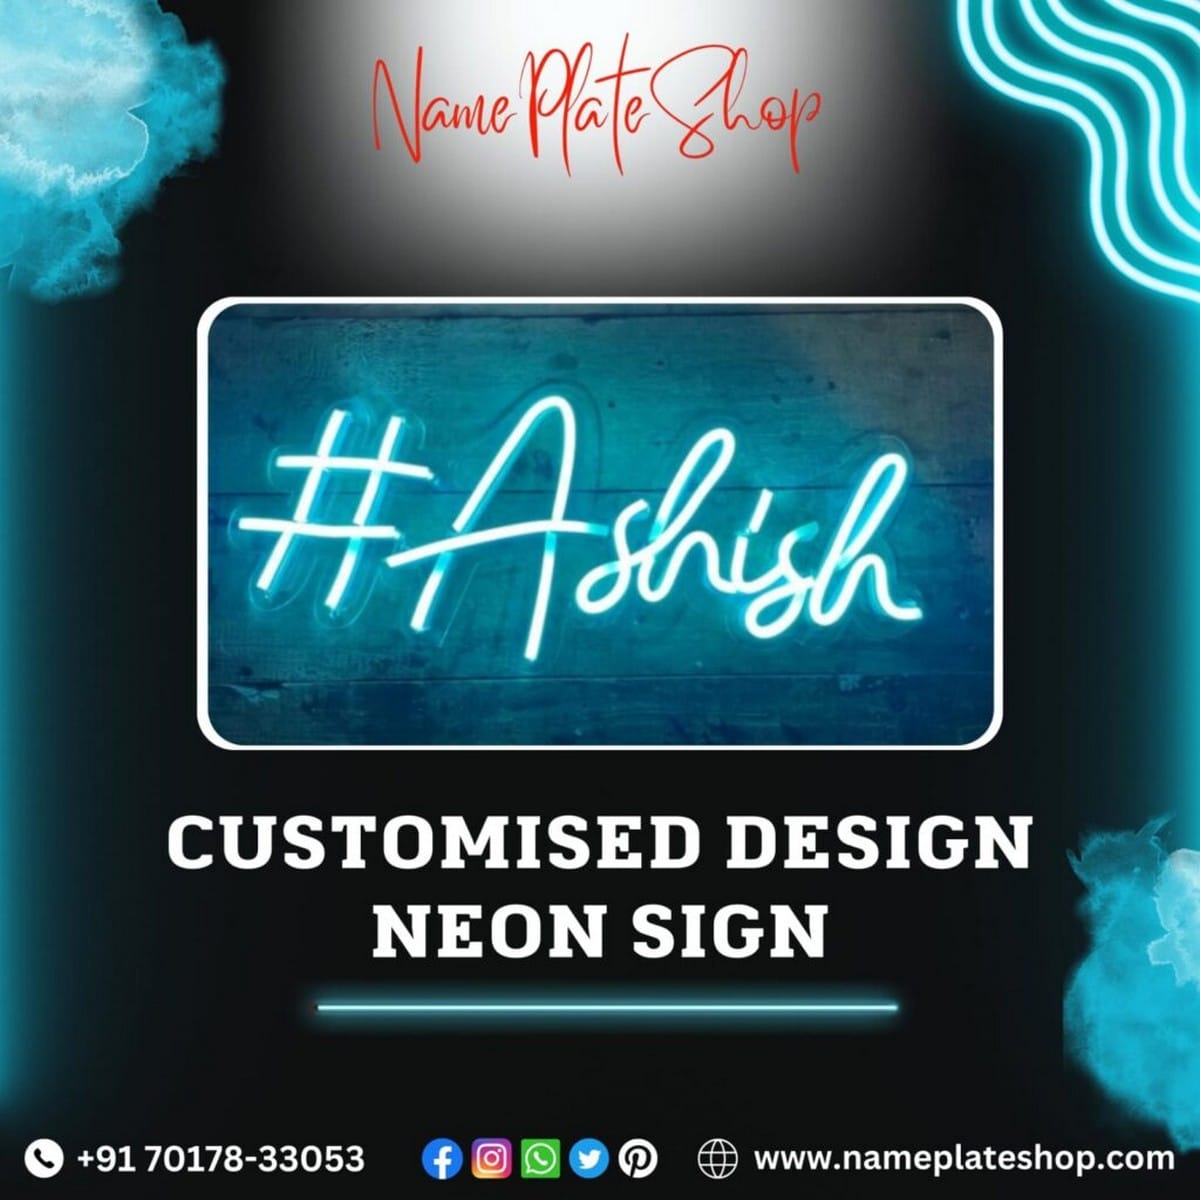 Buy Customized Neon Signs New Designs Online